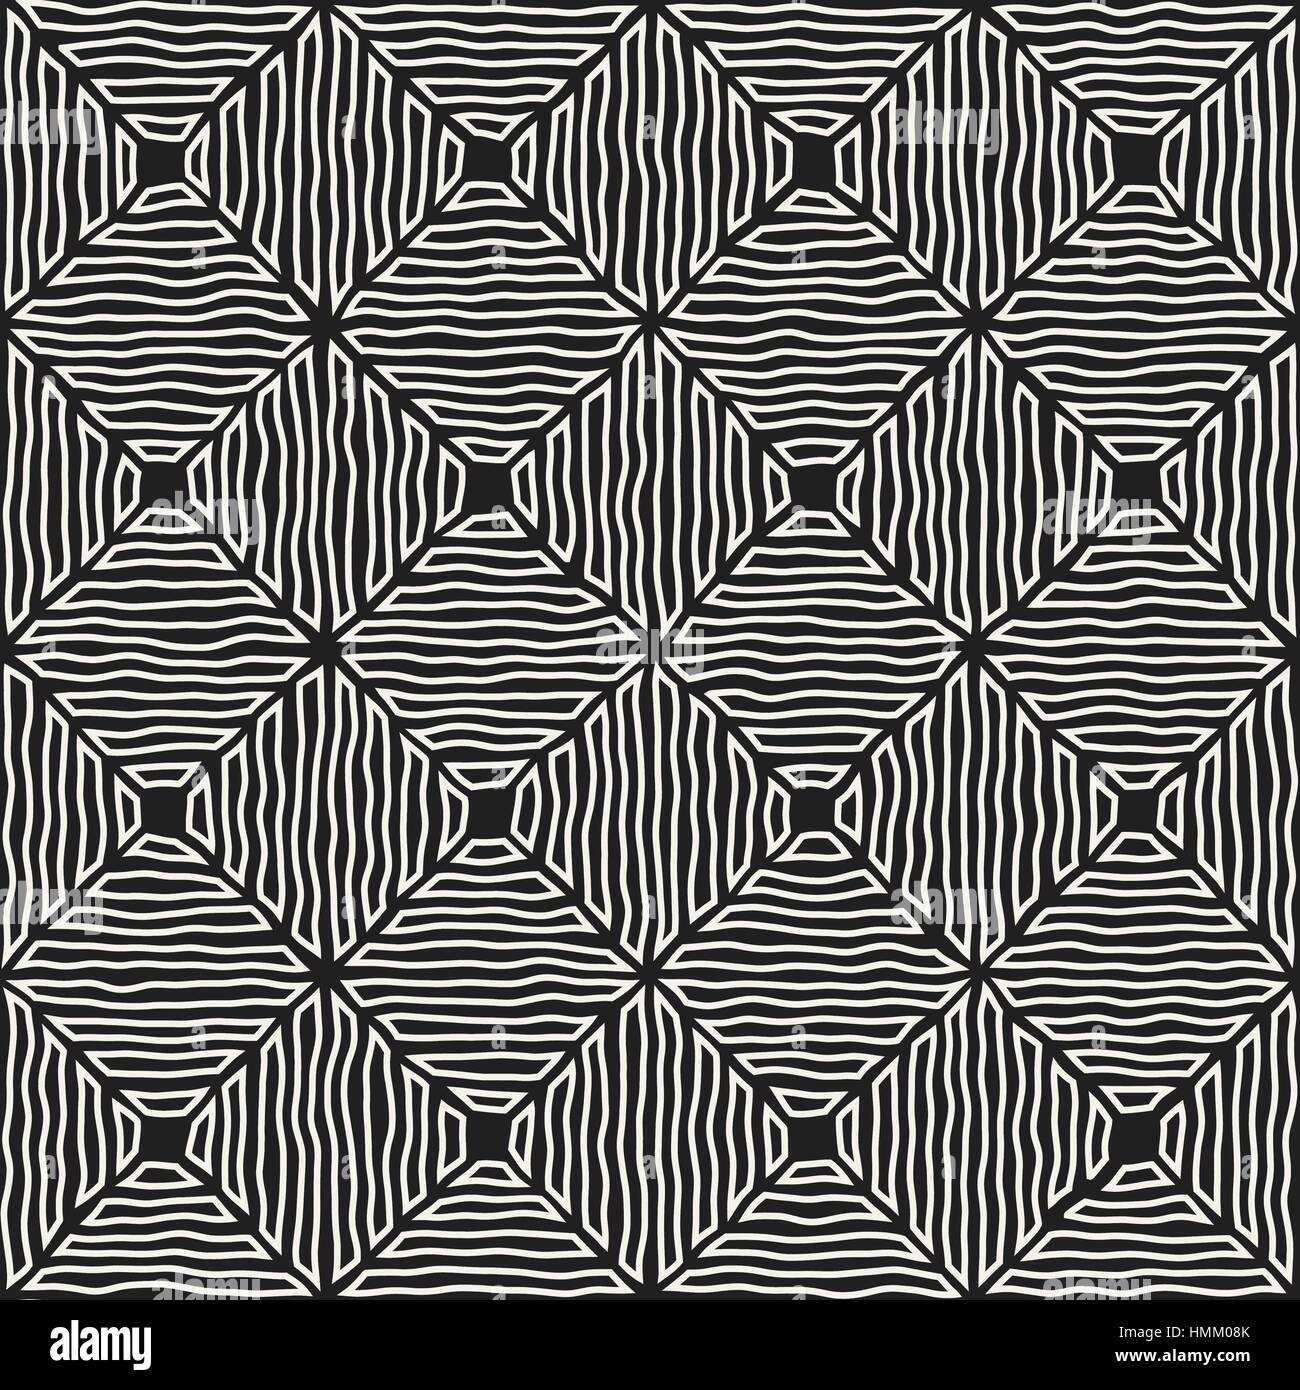 Rhombus Rough Hand Drawn Lines. Vector Seamless Black and White Pattern Stock Vector